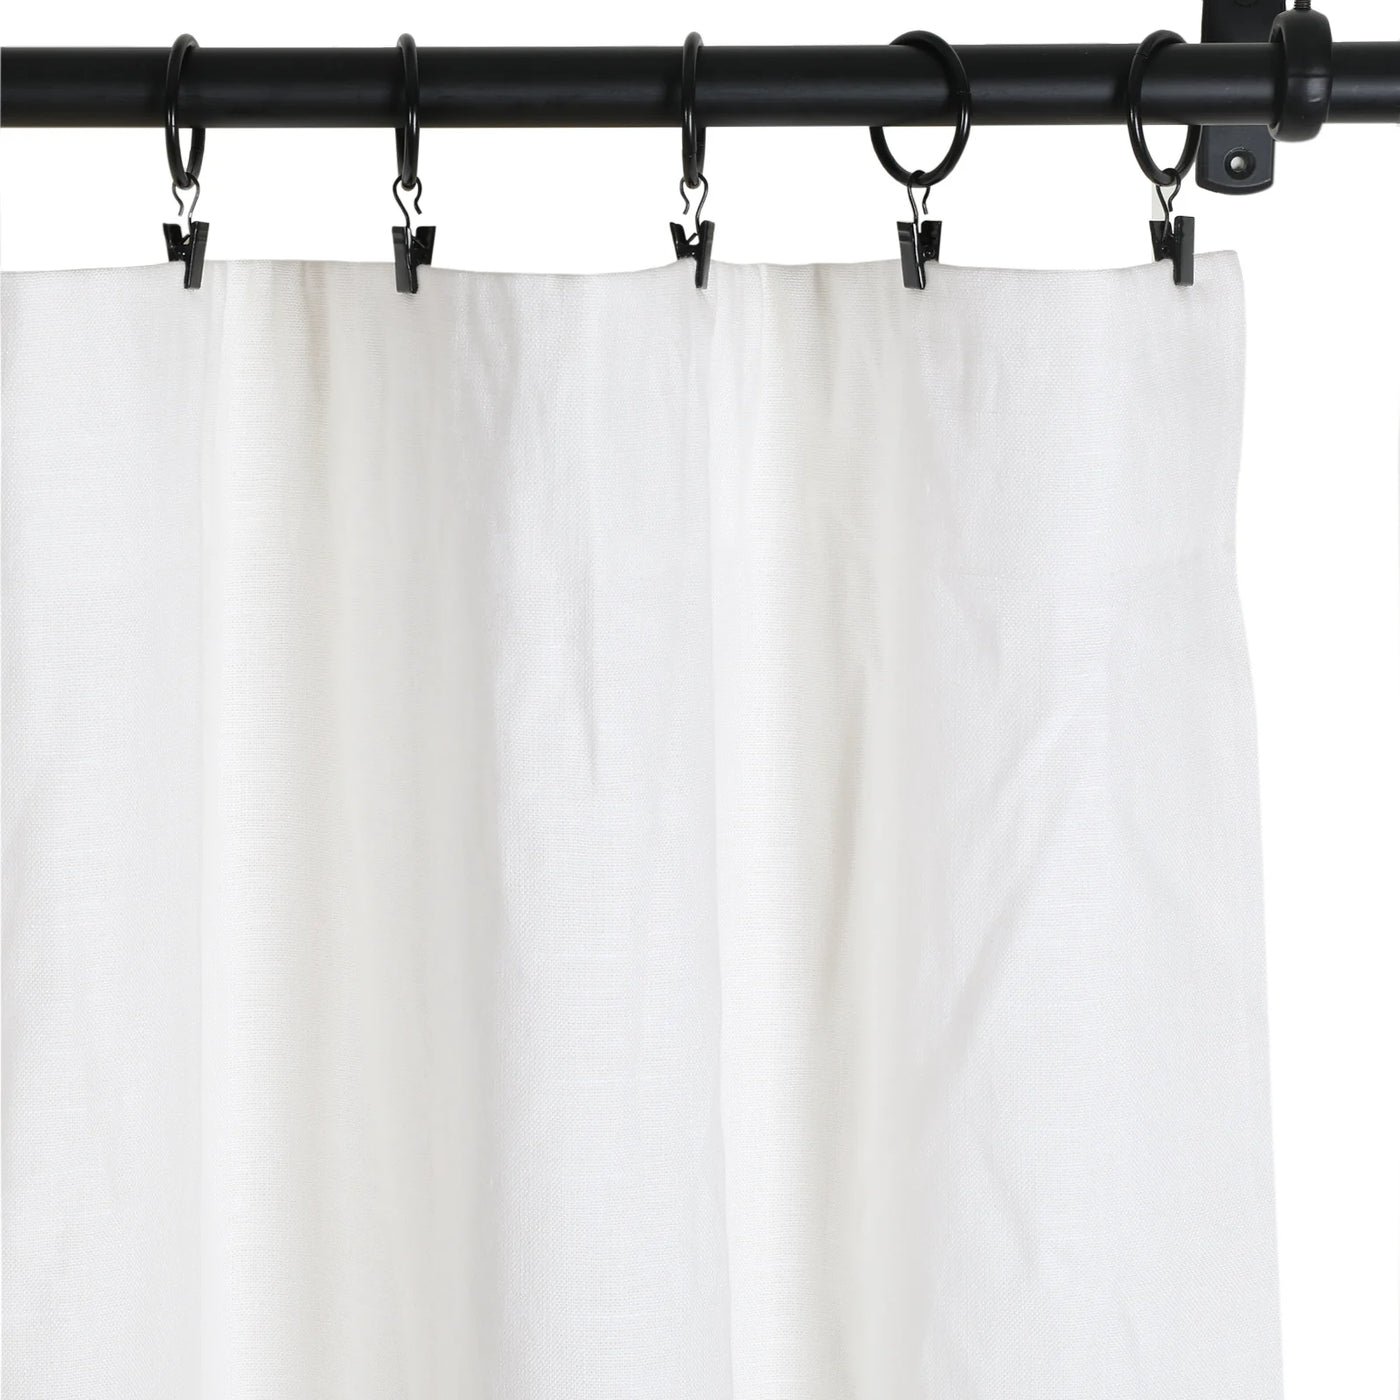 Jawara Linen Cotton Drapery 4-In-1 with Blackout Lining